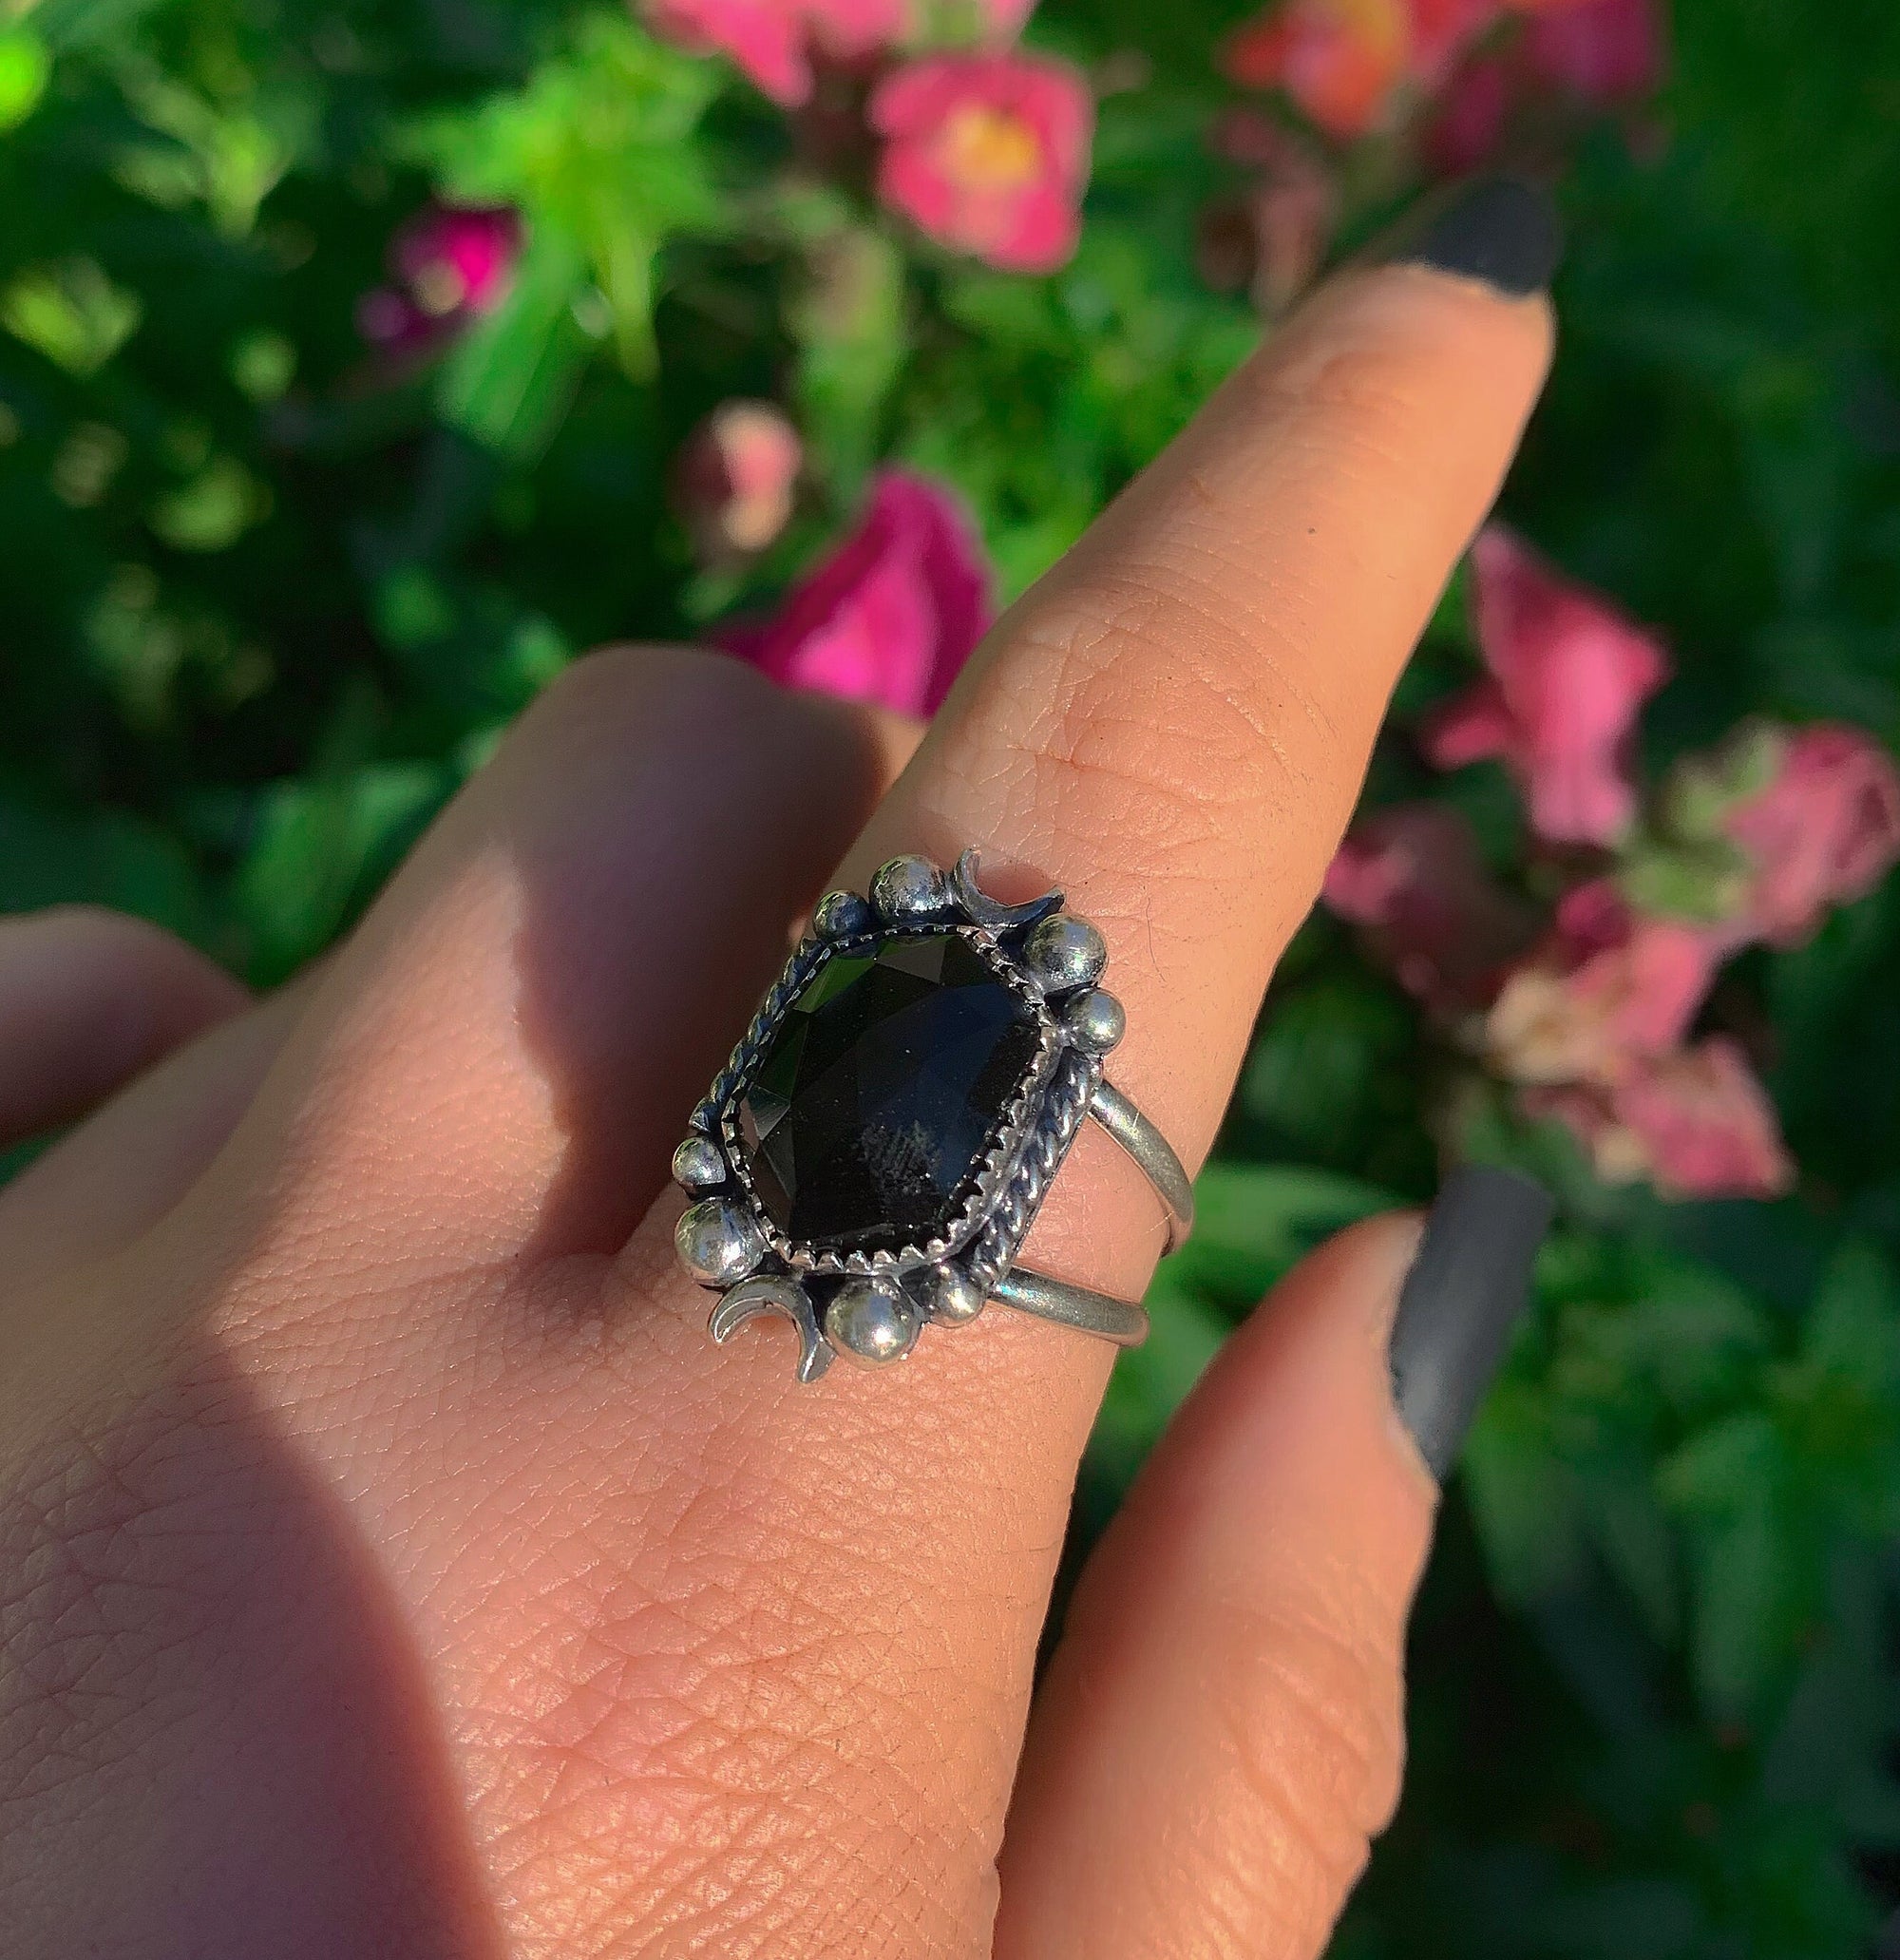 Rose Cut Black Onyx Ring - Size 9 1/4 - Sterling Silver - Hexagonal Onyx Ring - Faceted Onyx Moon Ring, Black Gemstone Crescent Moon Jewelry